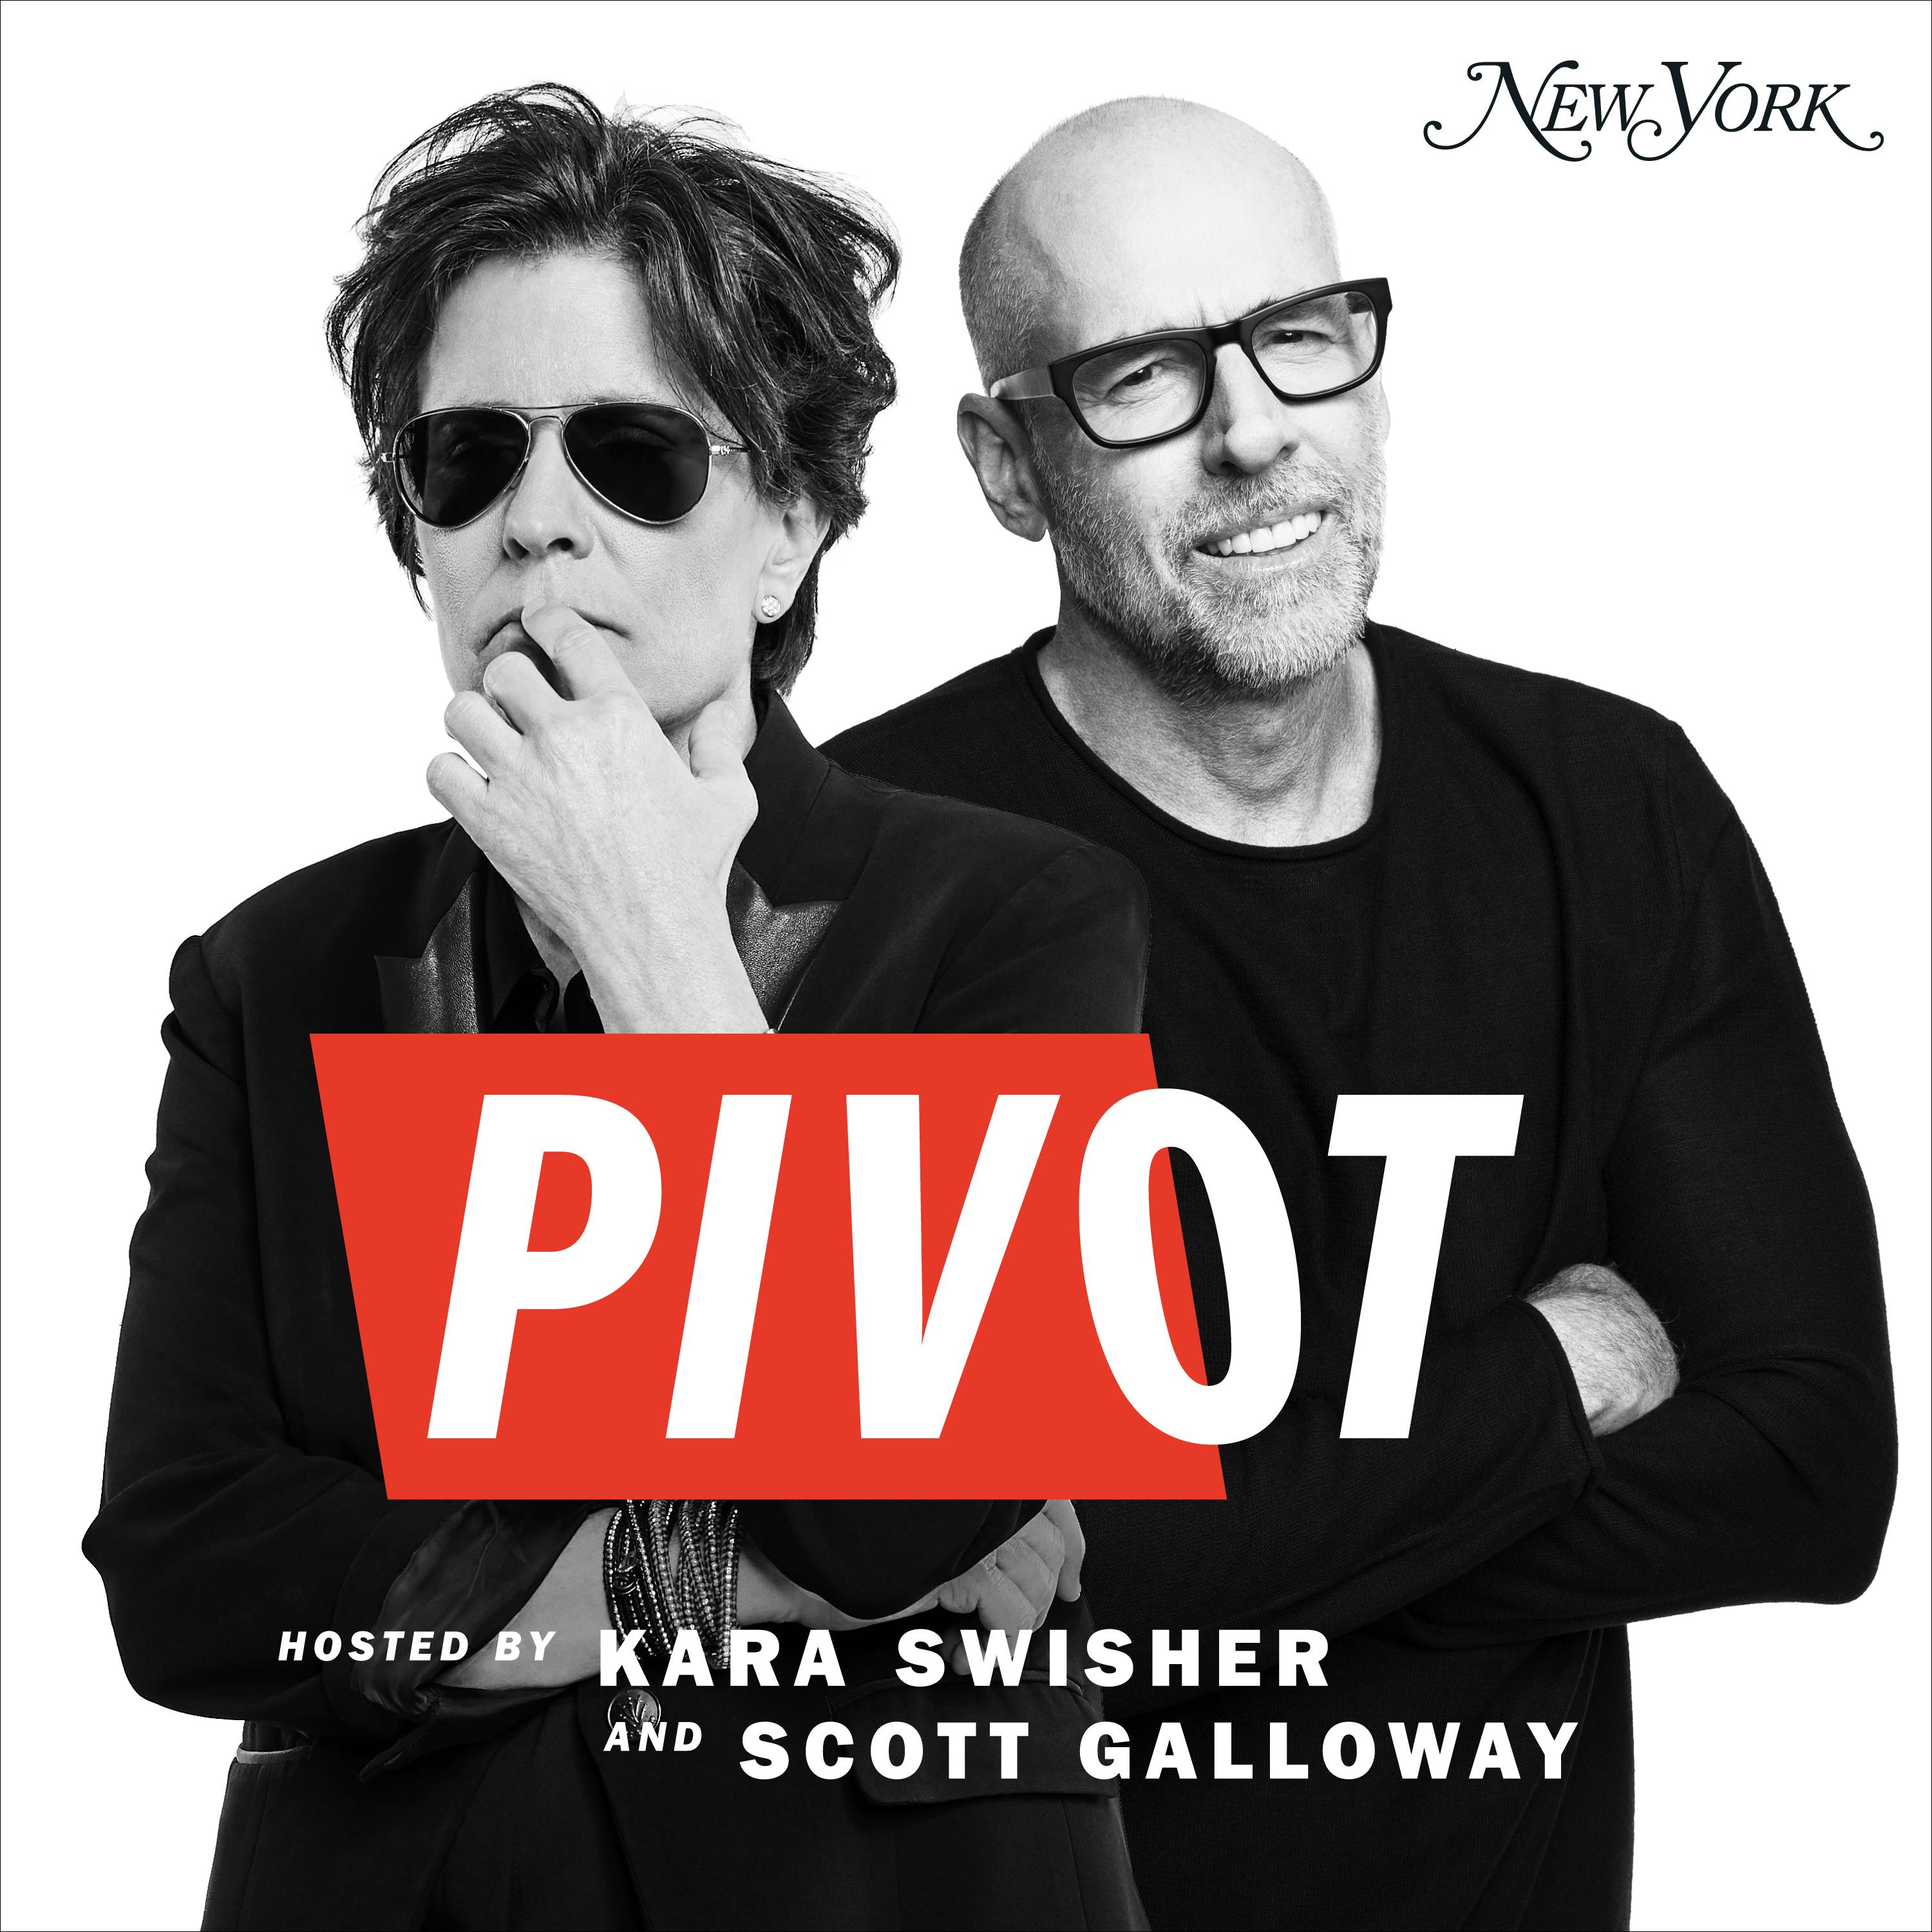 Q2 Quarterly Review: The State of the World According to Pivot by New York Magazine